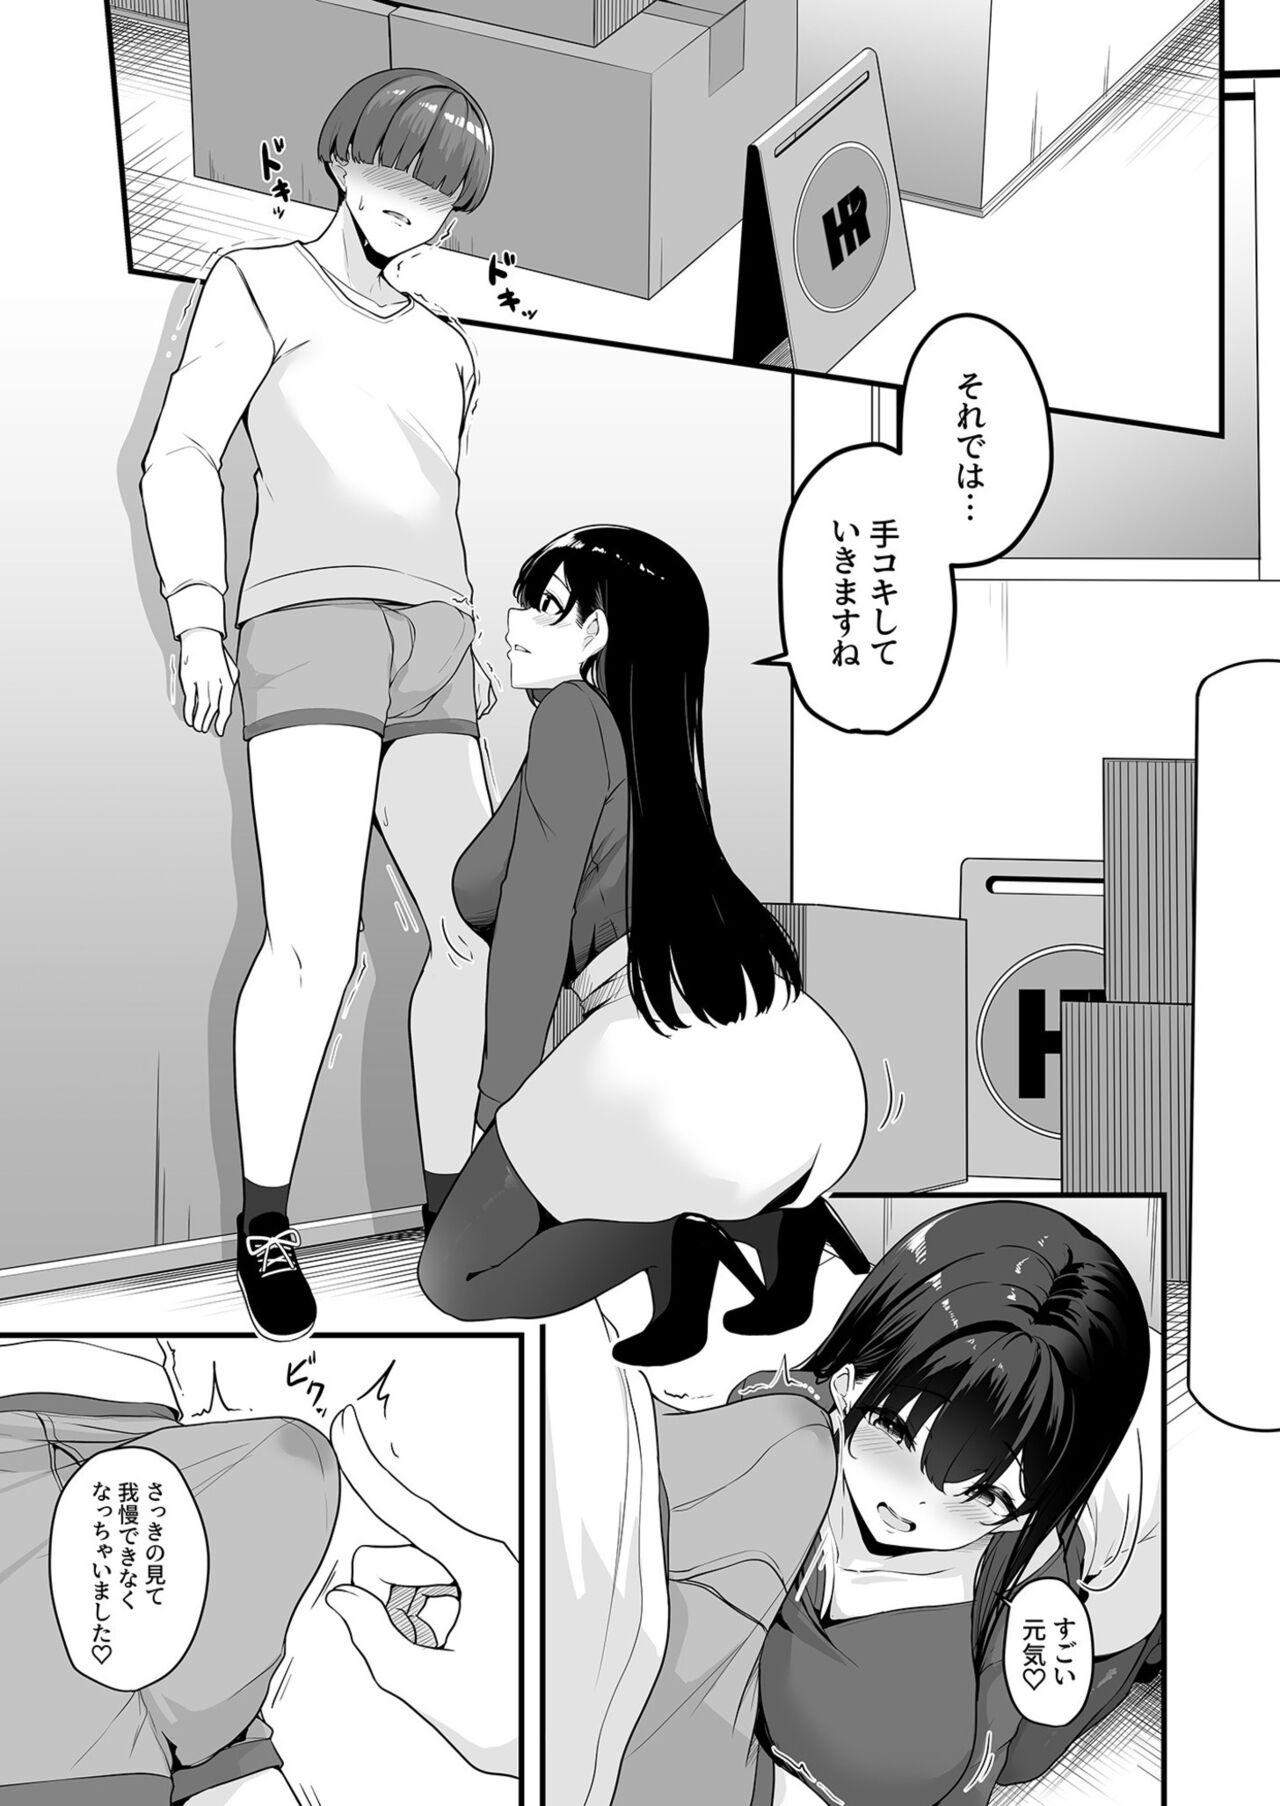 Celebrity Porn Onee-san to Shiyo? Exposed - Page 11